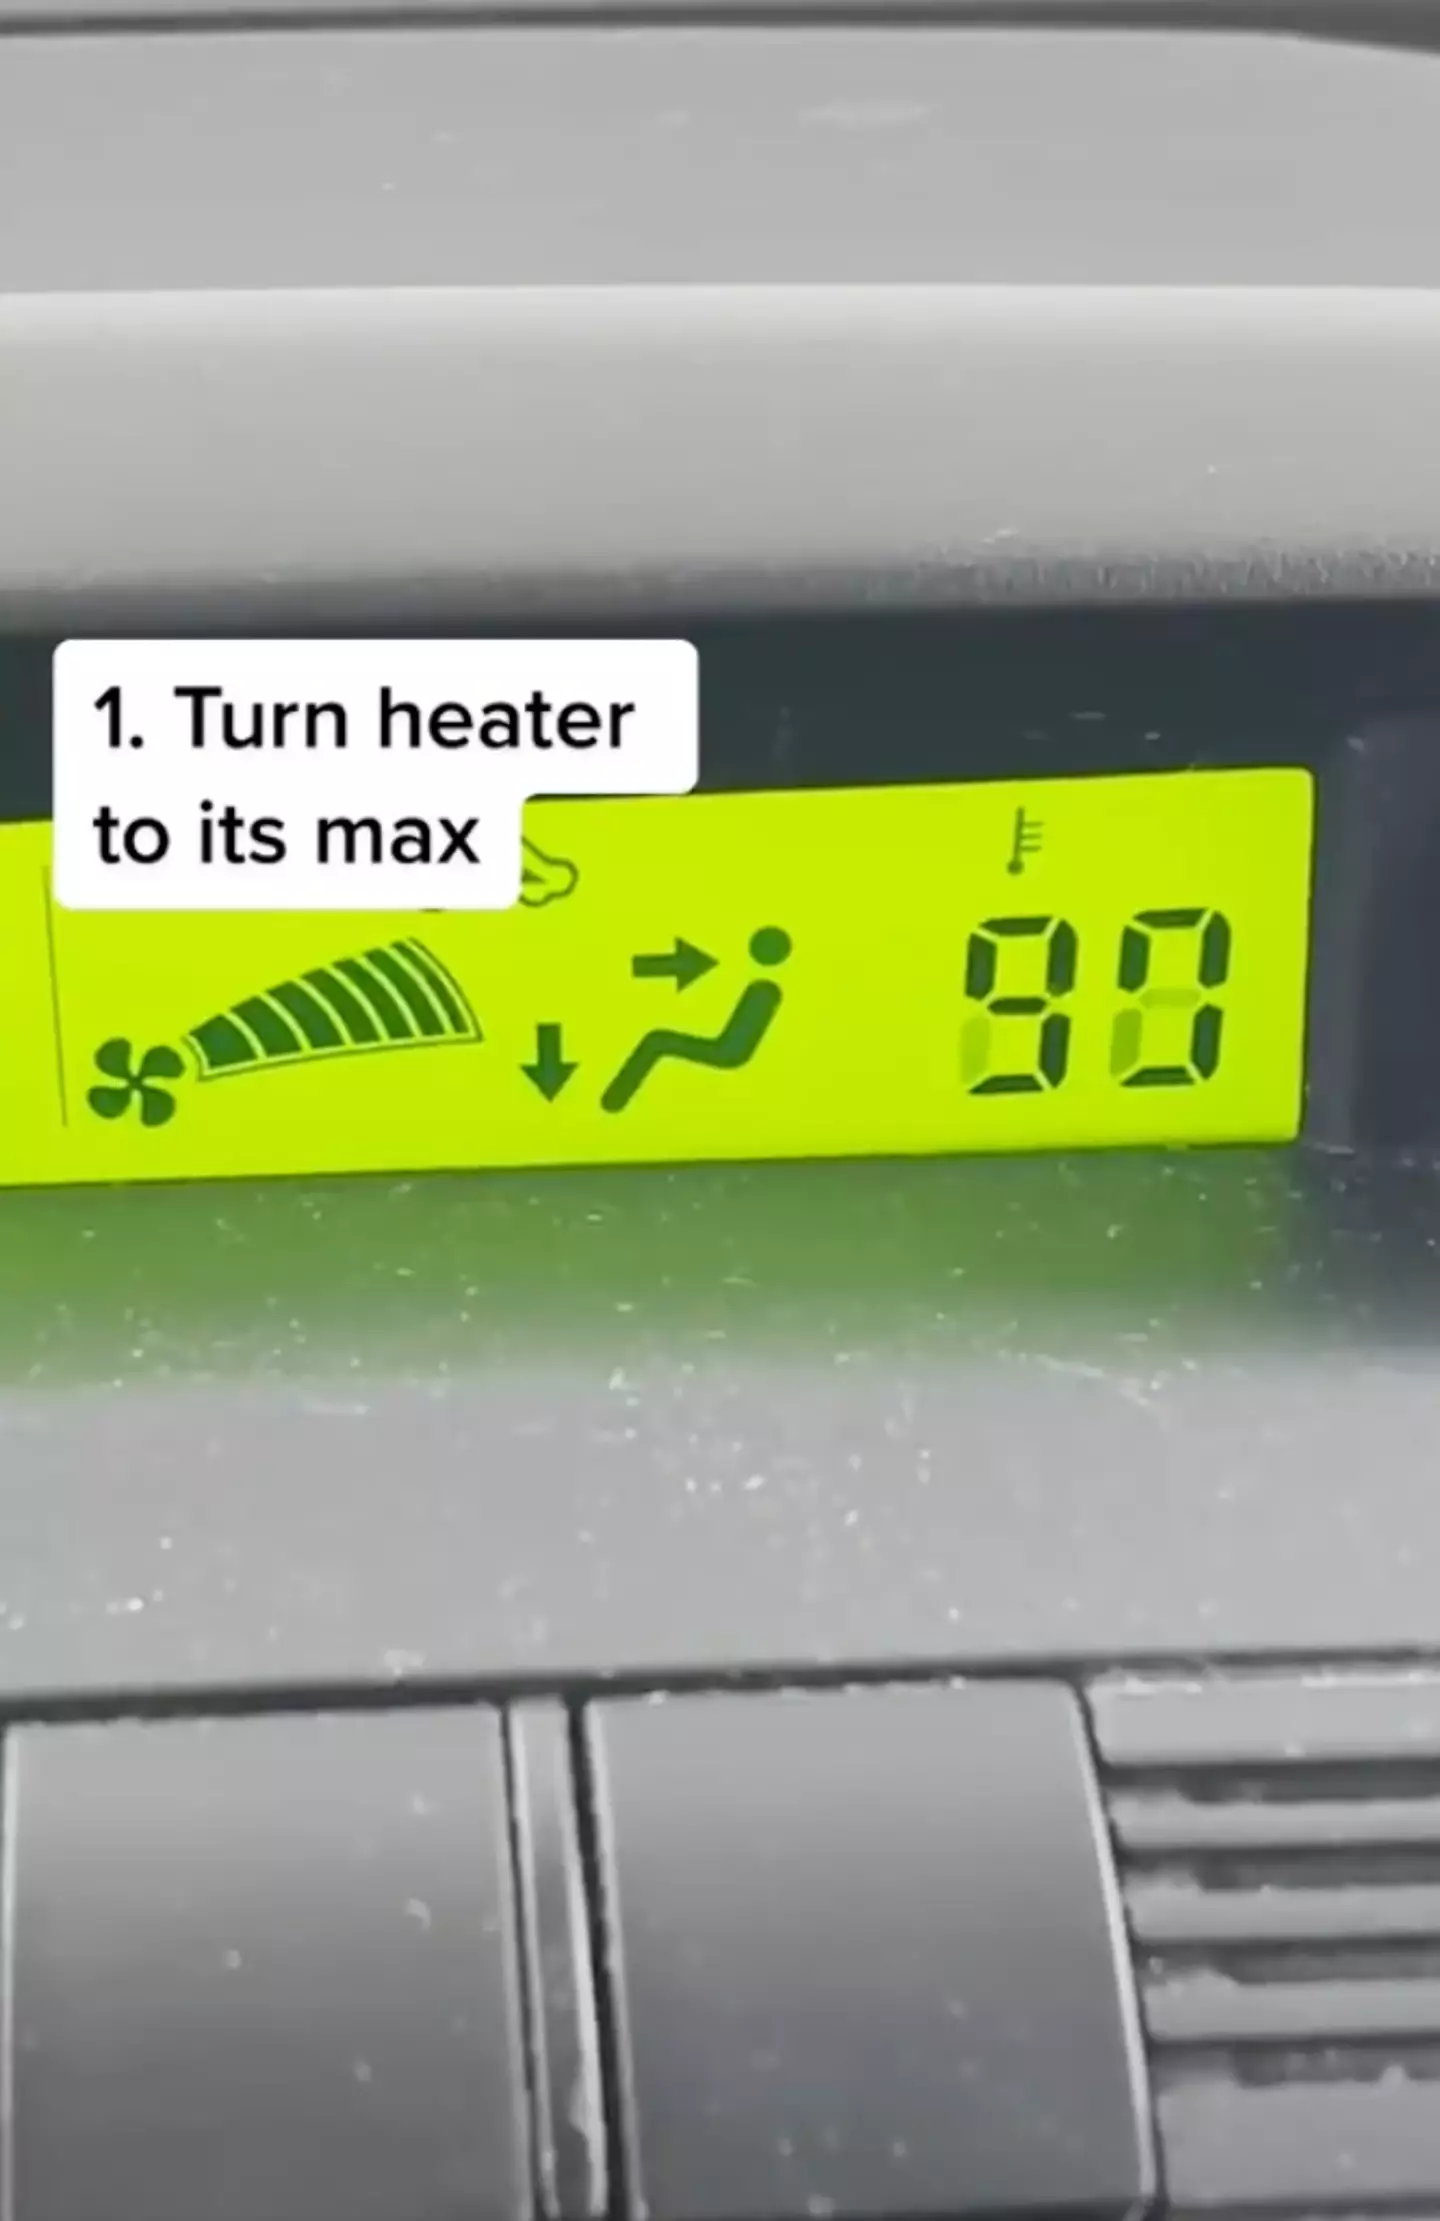 The first step is turning the heater to the max.